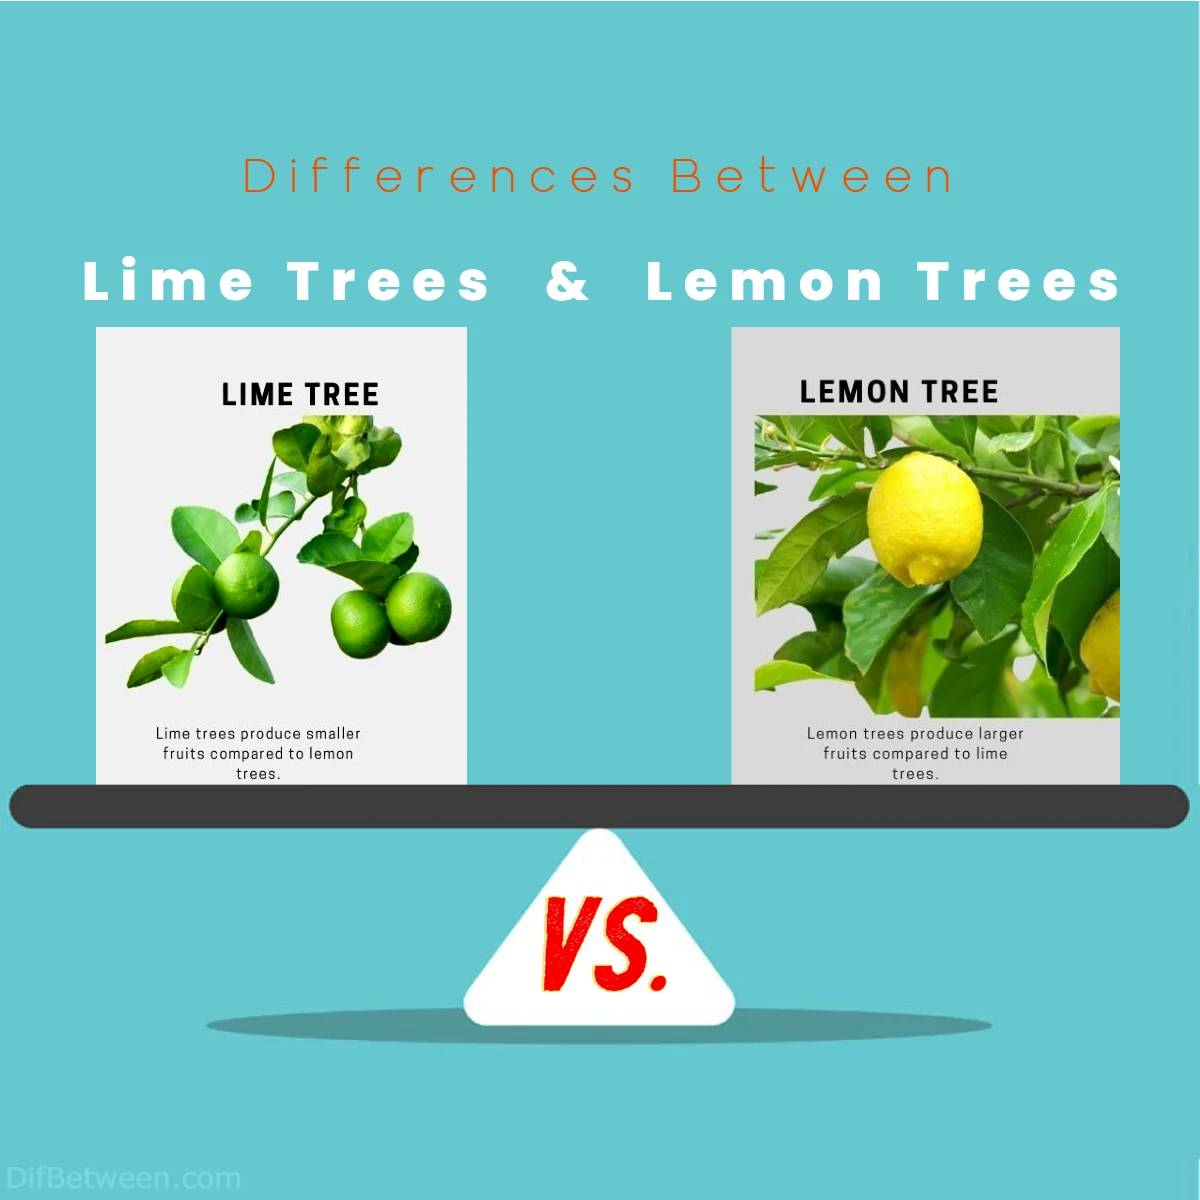 Differences Between Lime vs Lemon Trees